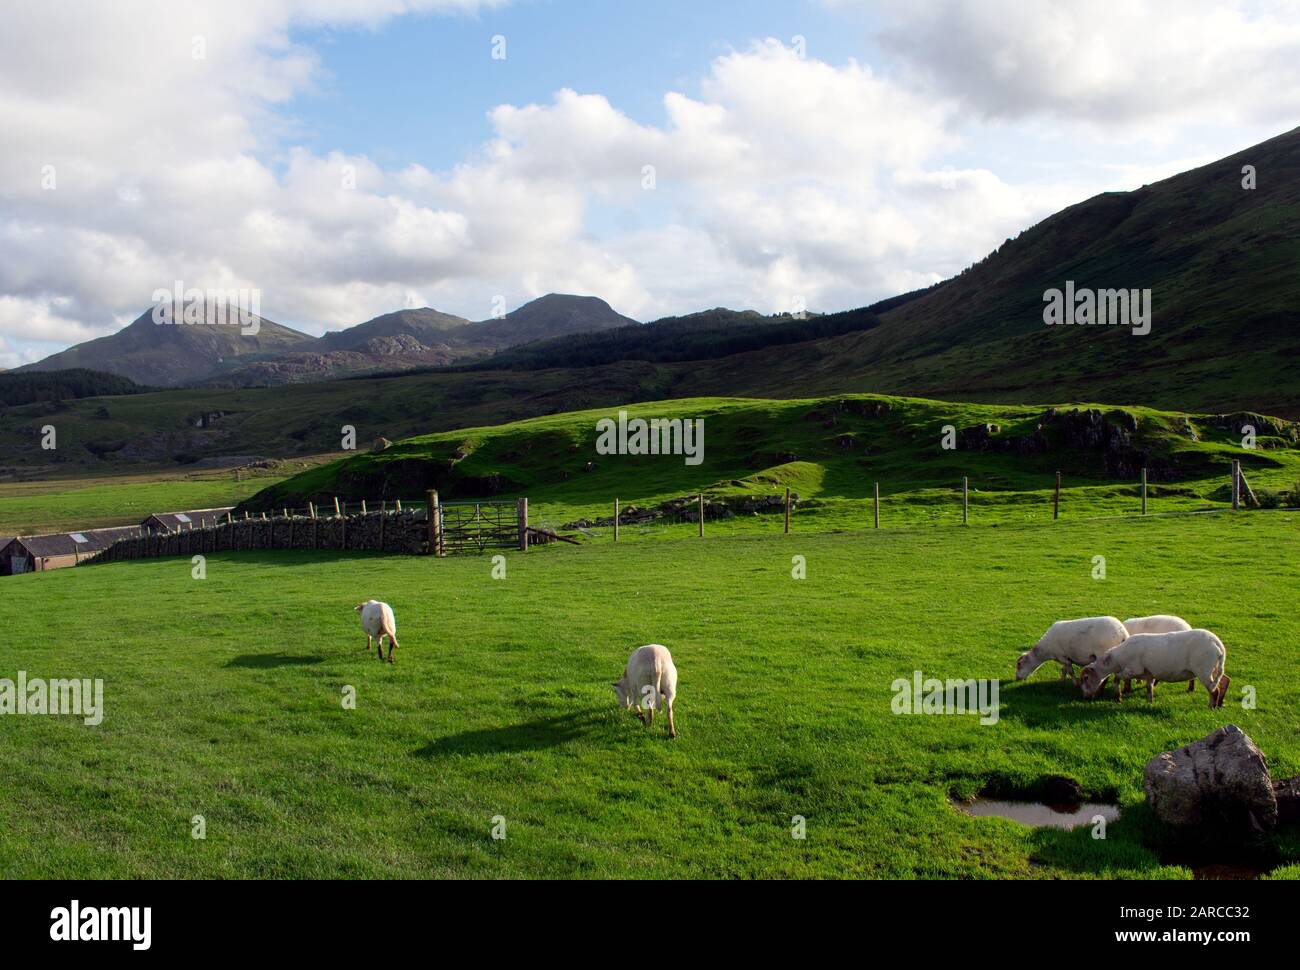 Beautiful shot of grassy fields and mountains with sheep and lambs walking around in Snowdonia Stock Photo